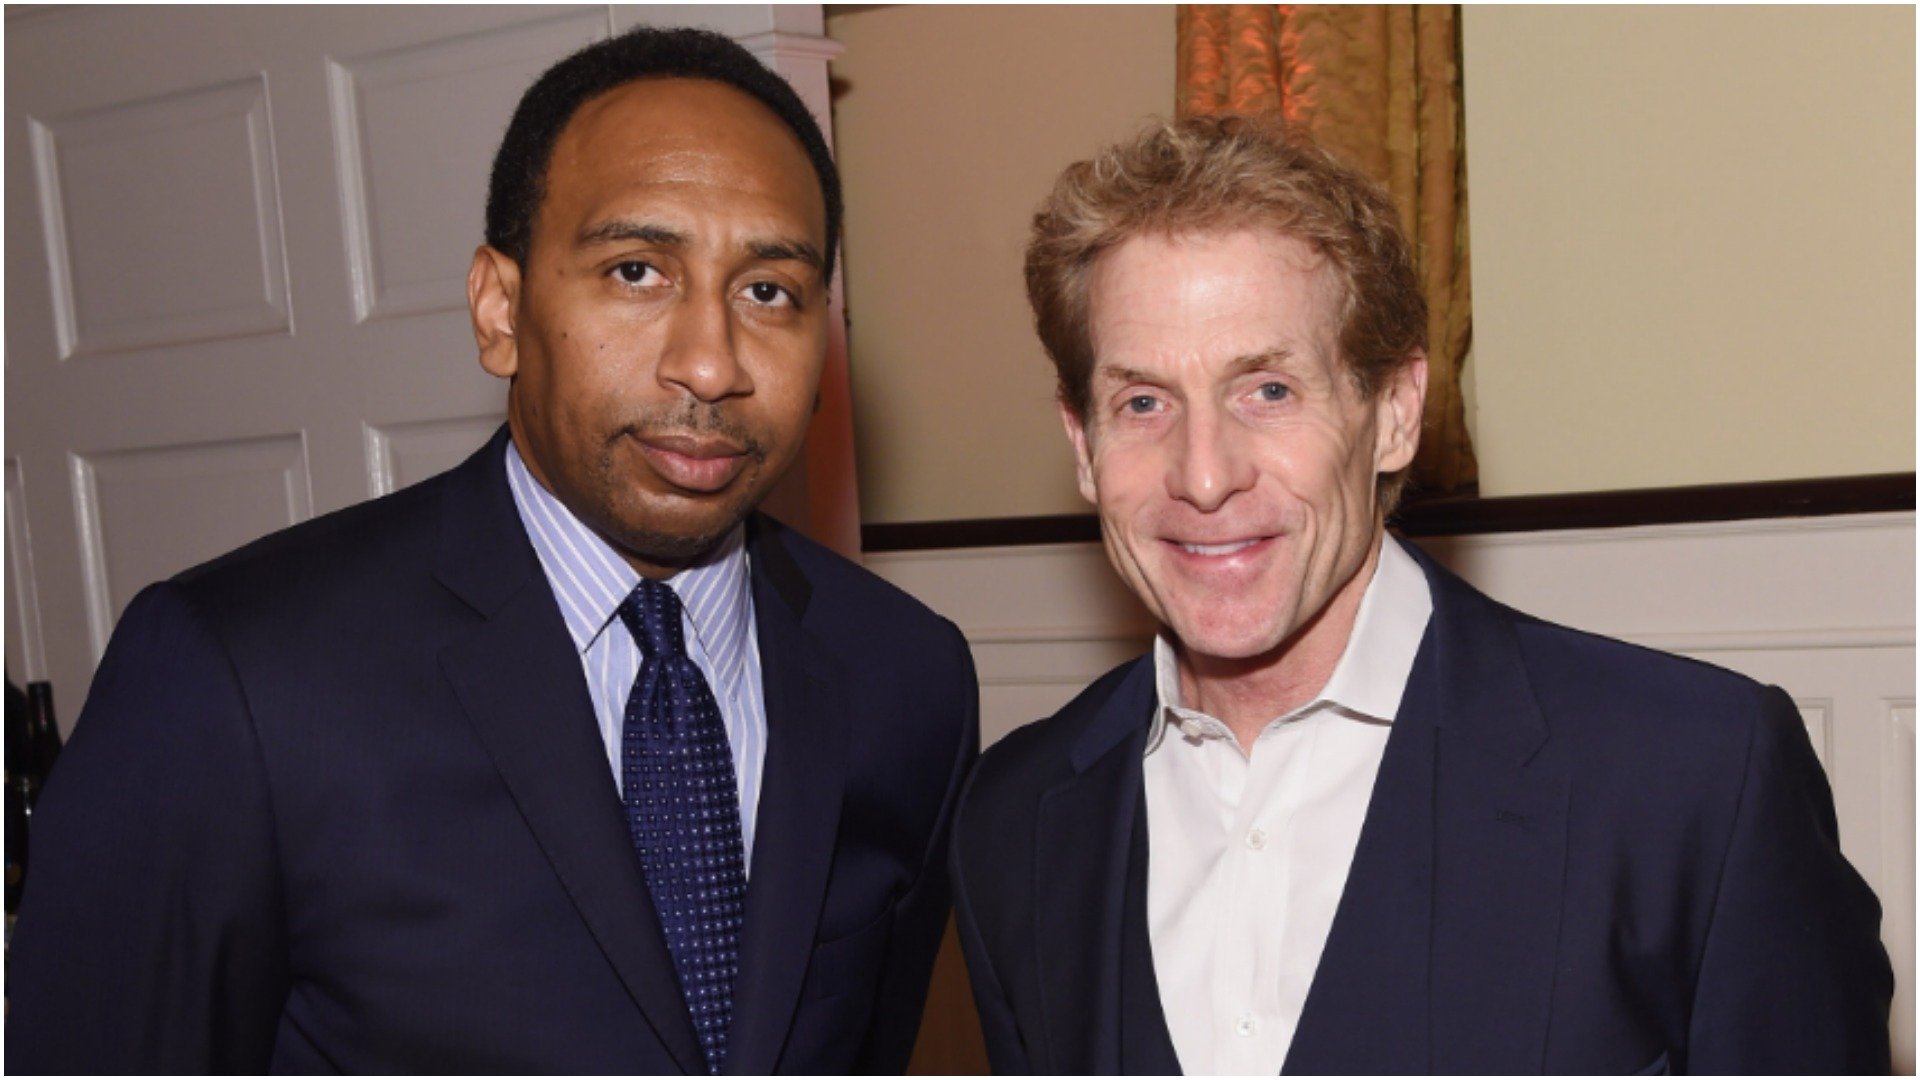 Skip Bayless Is Beefing With Stephen A. Smith, Claims Smith Lied About How 'First Take' Started